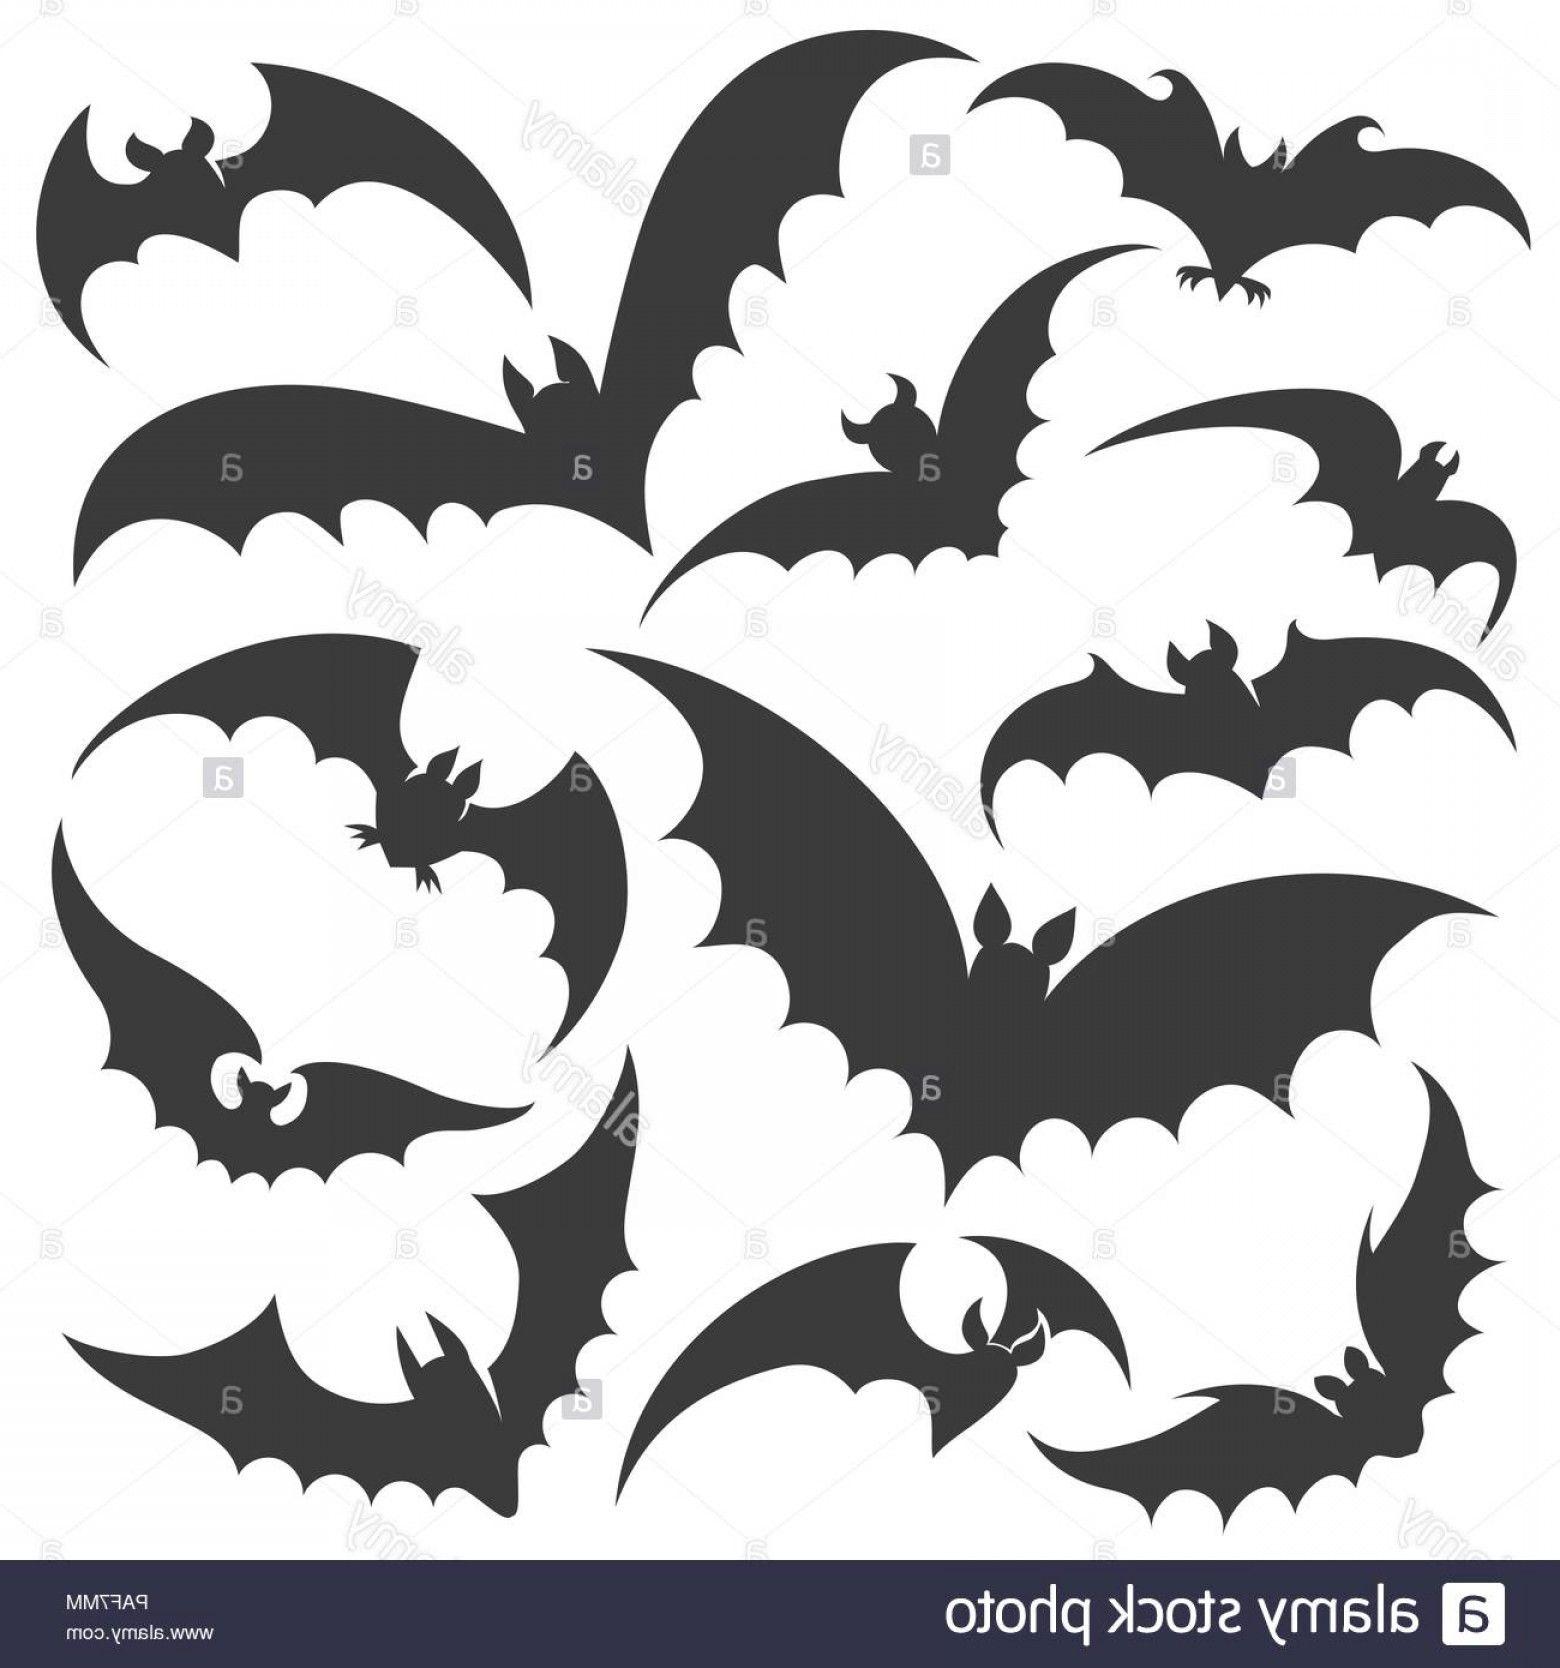 Bat Silhouette Images for Logo - Bat Silhouettes Vector Bats Silhouette Set Halloween Scary Night ...